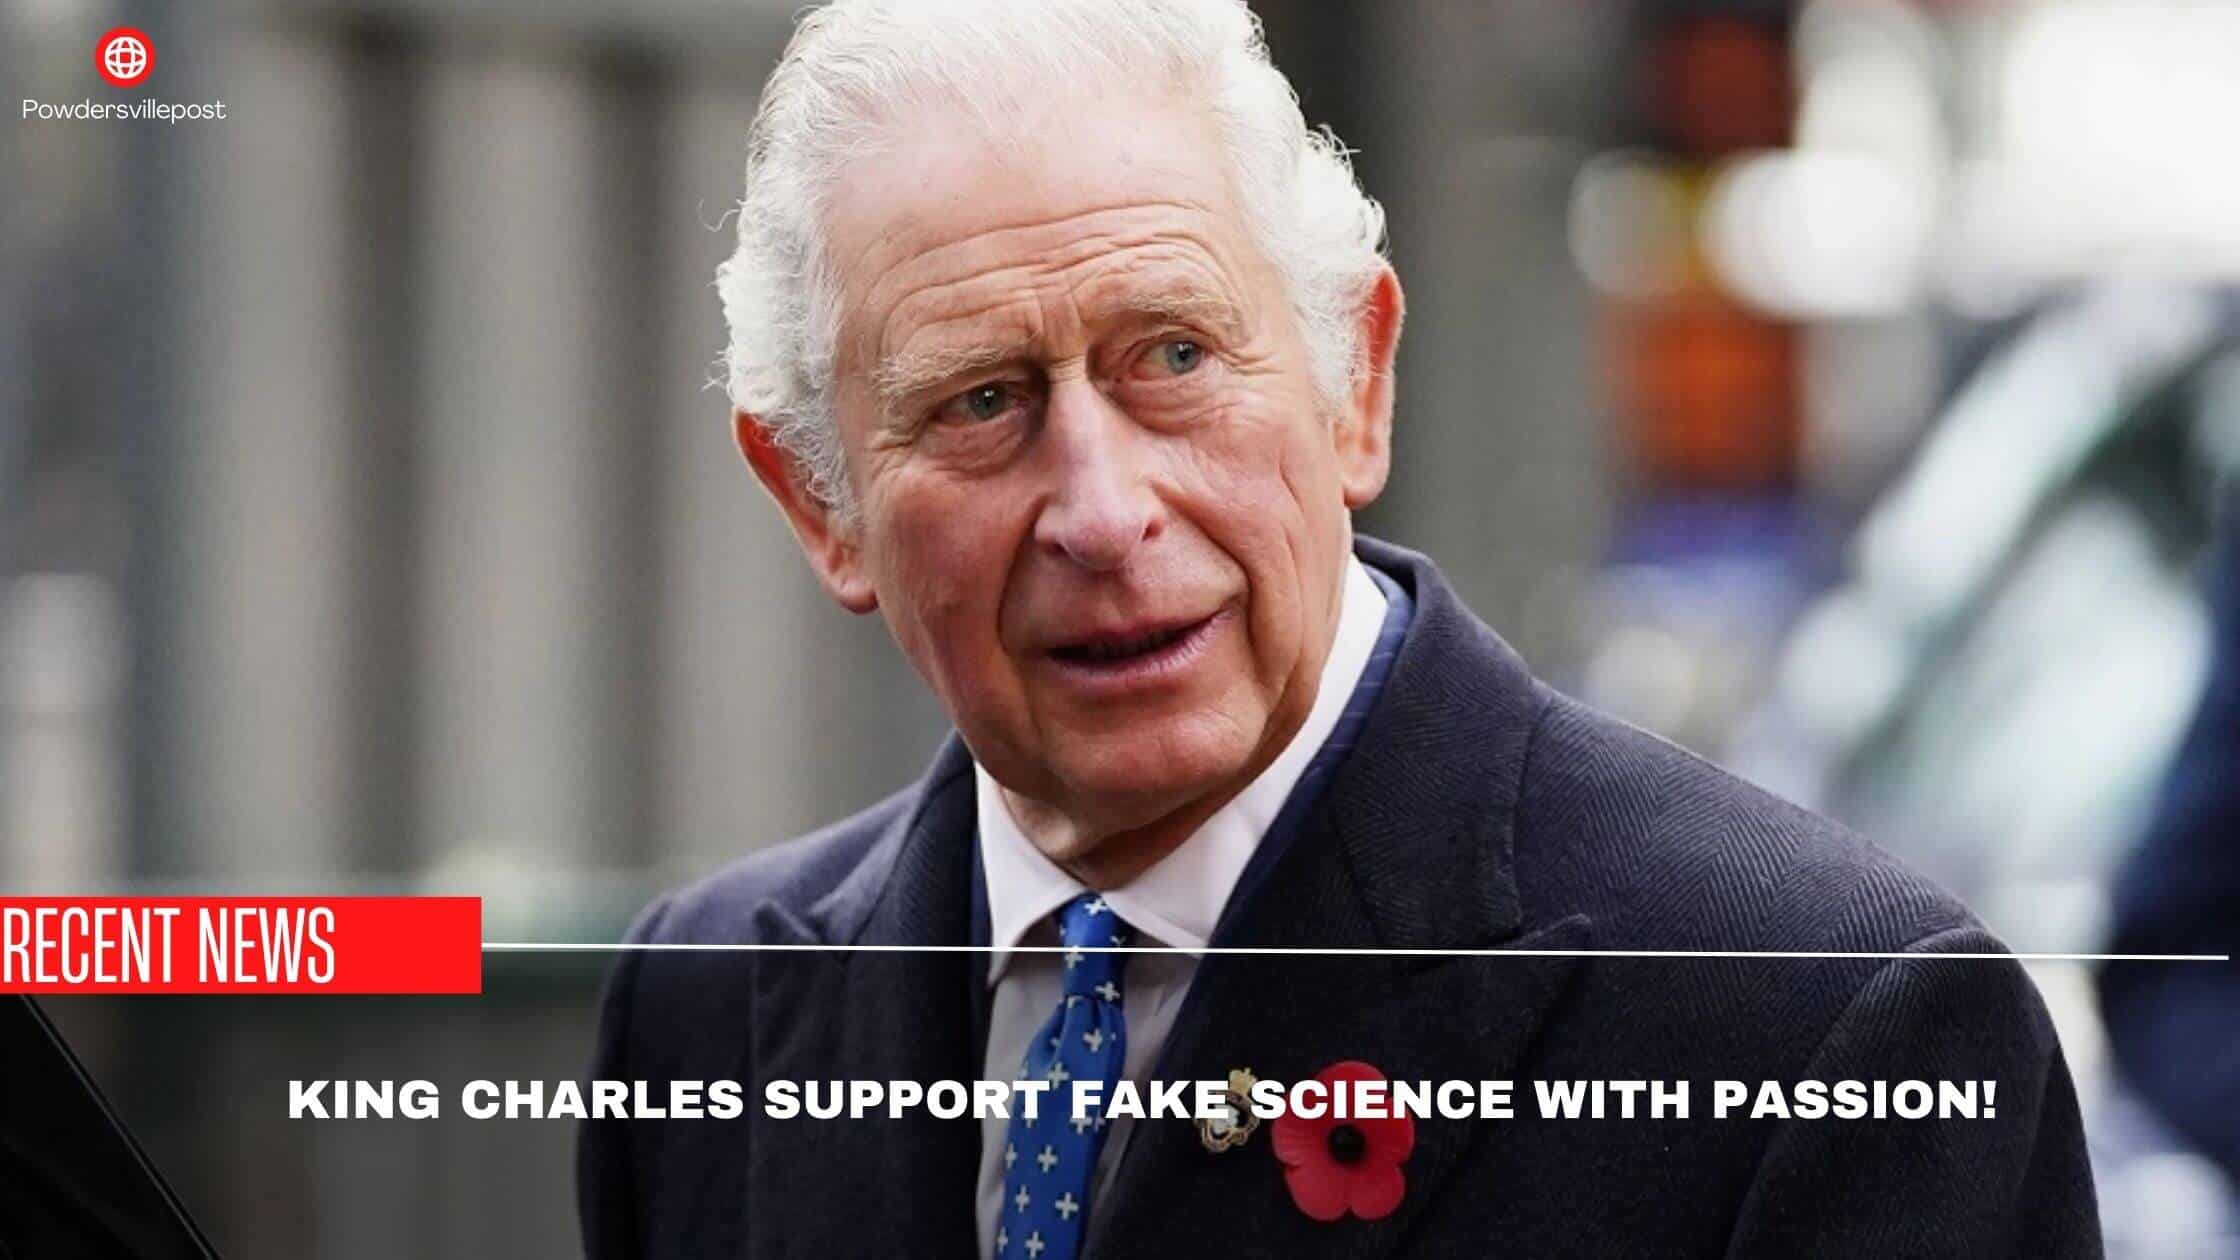 King Charles Support Fake Science With Passion!